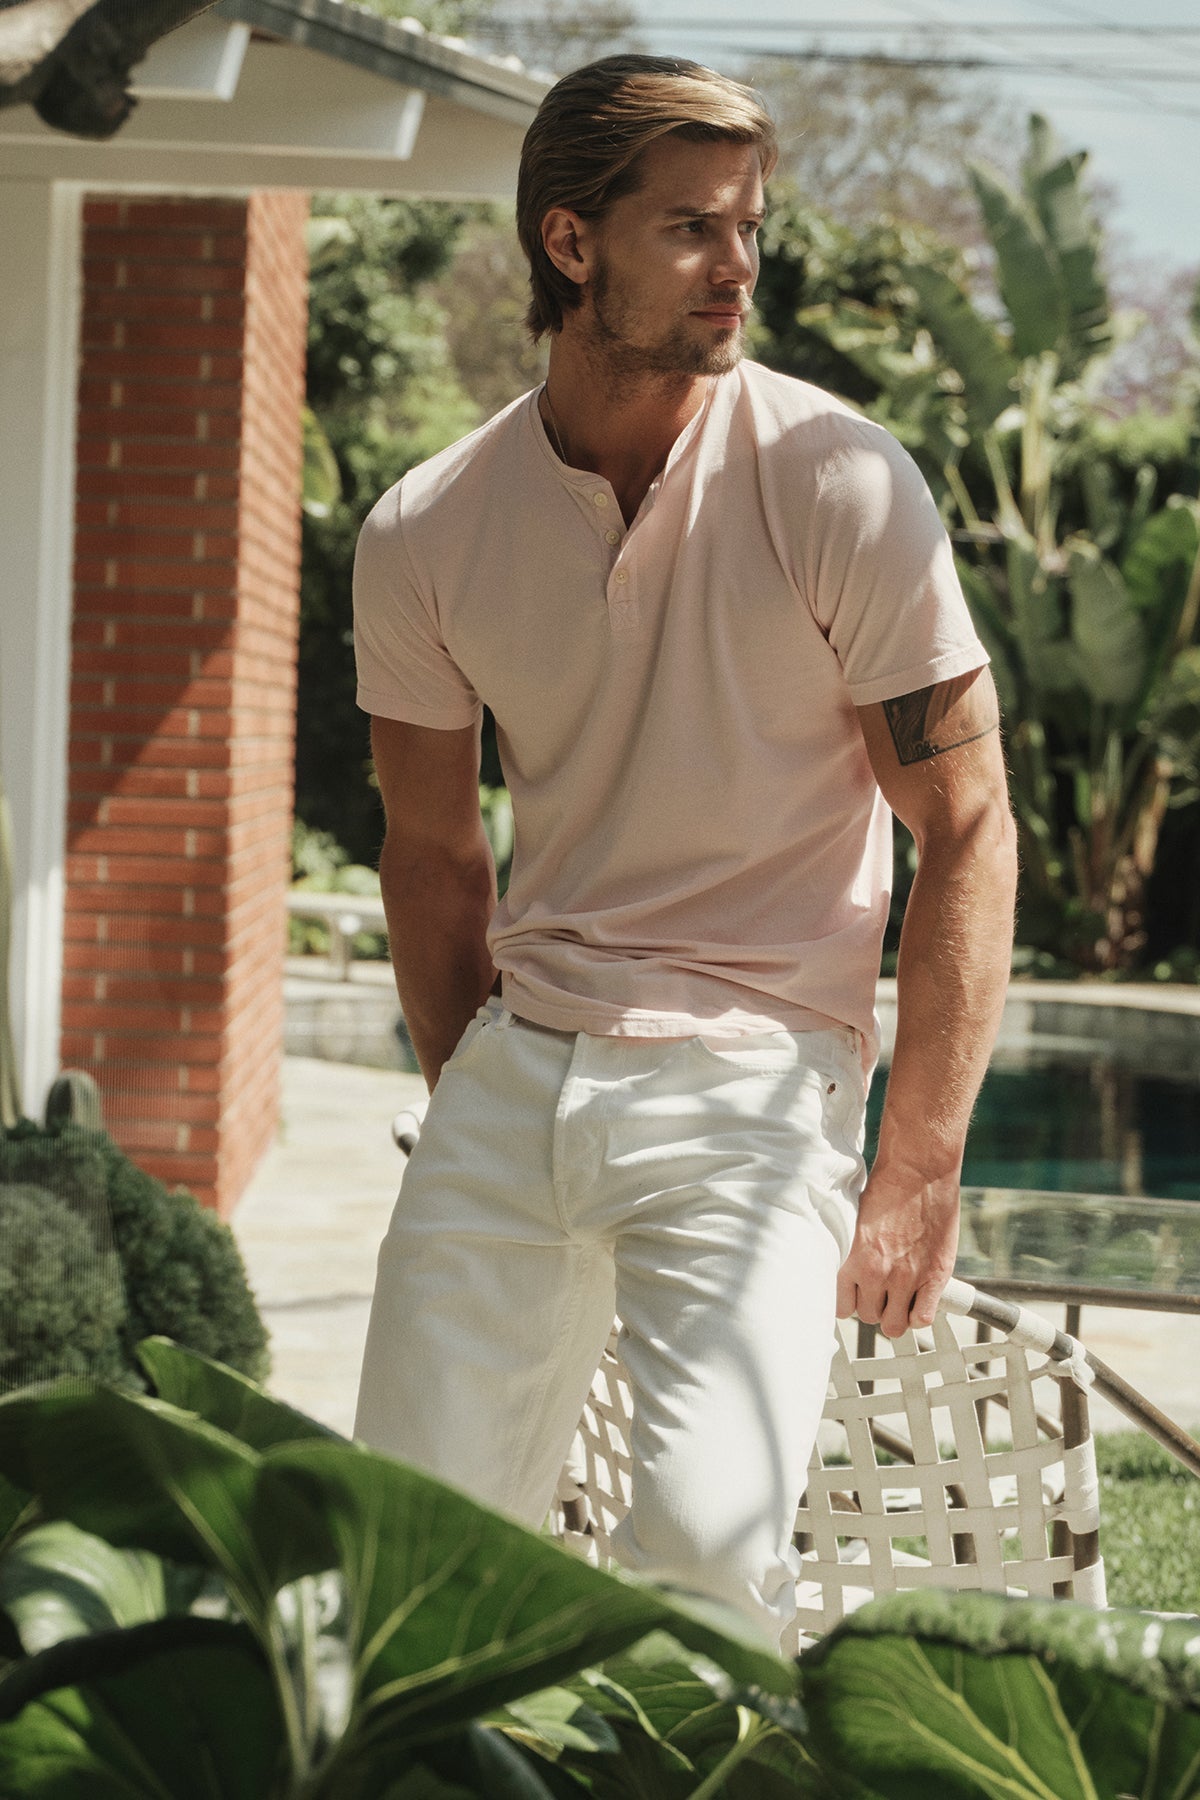   Fulton Short Sleeve Henley in light pink color bloom with white pants front view sitting outside 